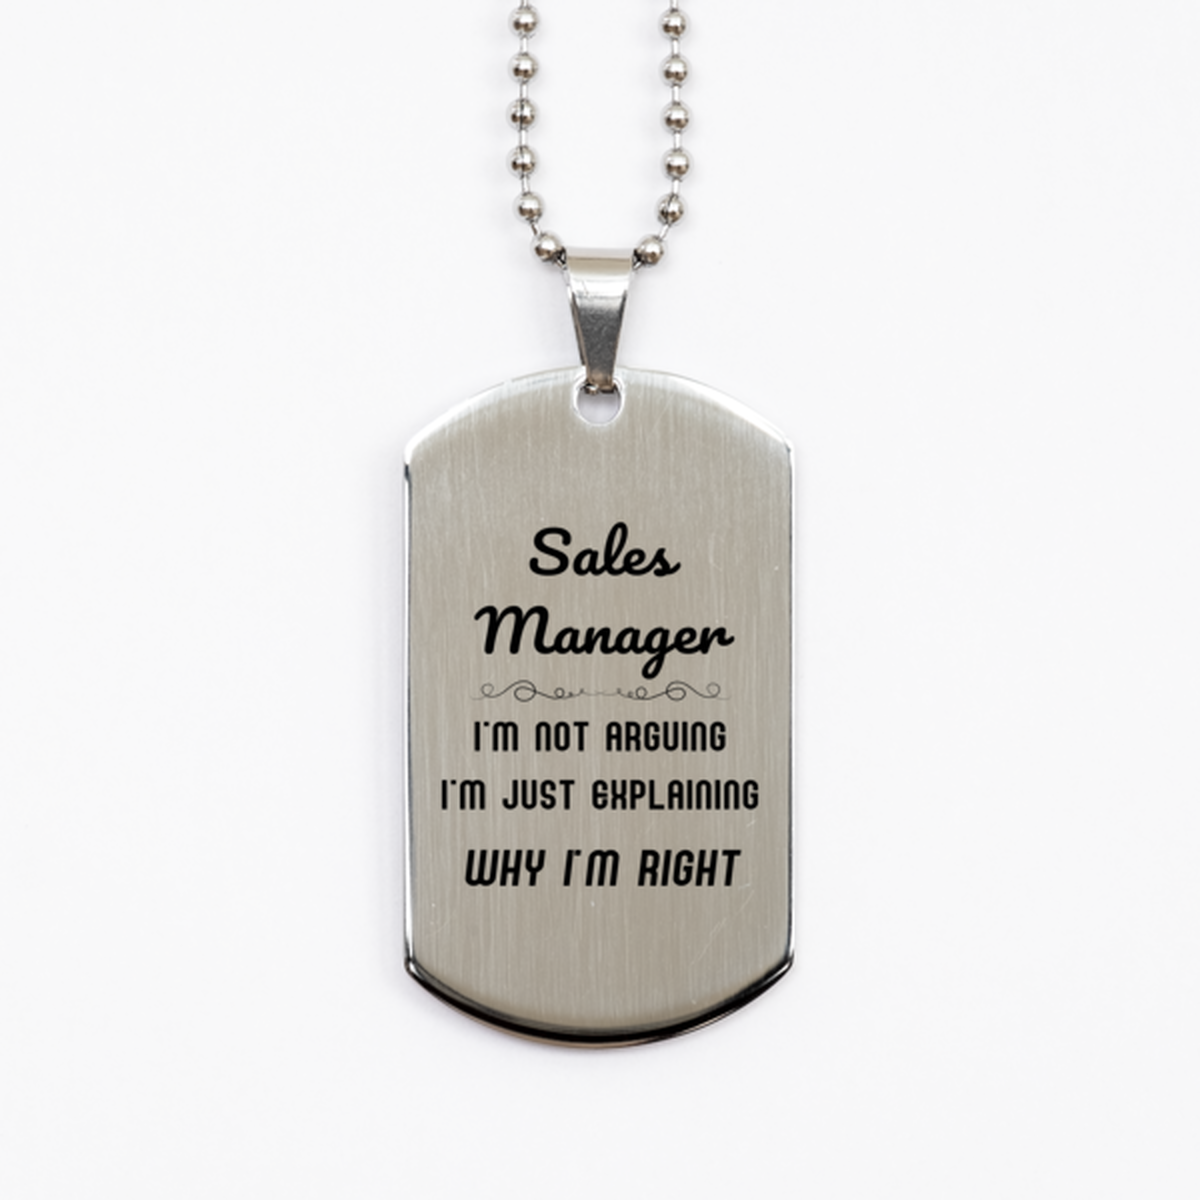 Sales Manager I'm not Arguing. I'm Just Explaining Why I'm RIGHT Silver Dog Tag, Funny Saying Quote Sales Manager Gifts For Sales Manager Graduation Birthday Christmas Gifts for Men Women Coworker